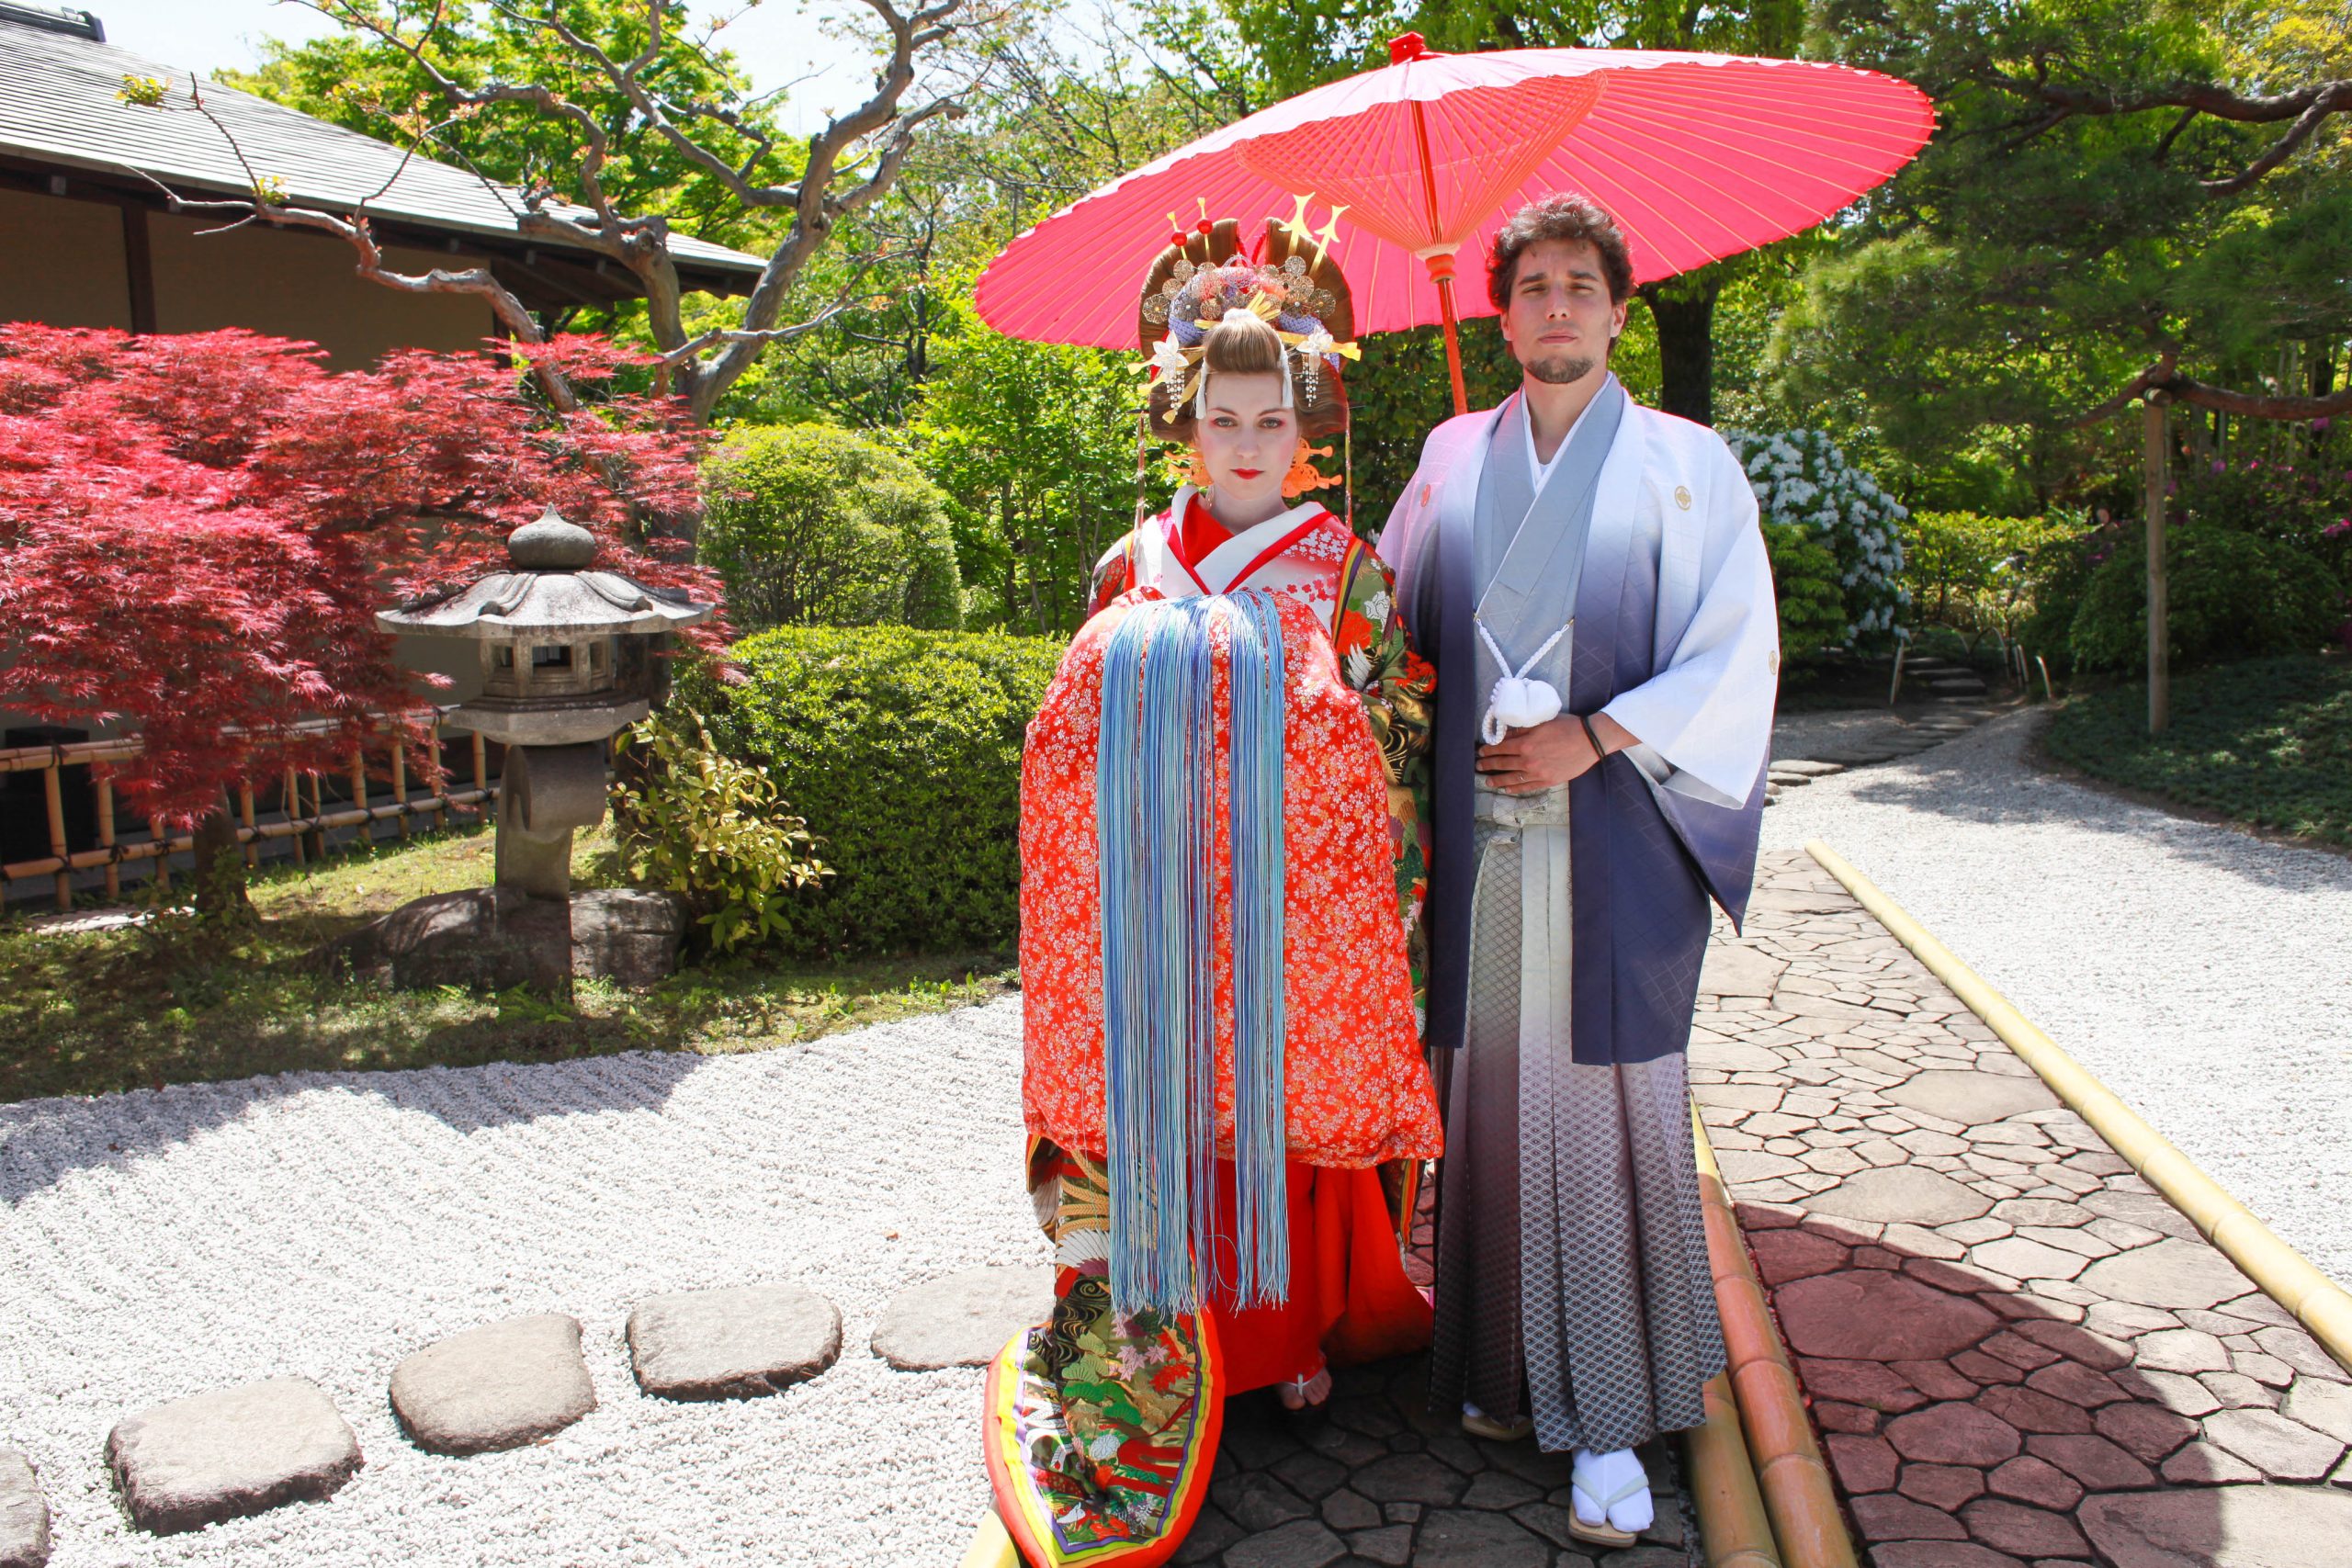 Ode to the Japanese Kimono, the national dress of Japan